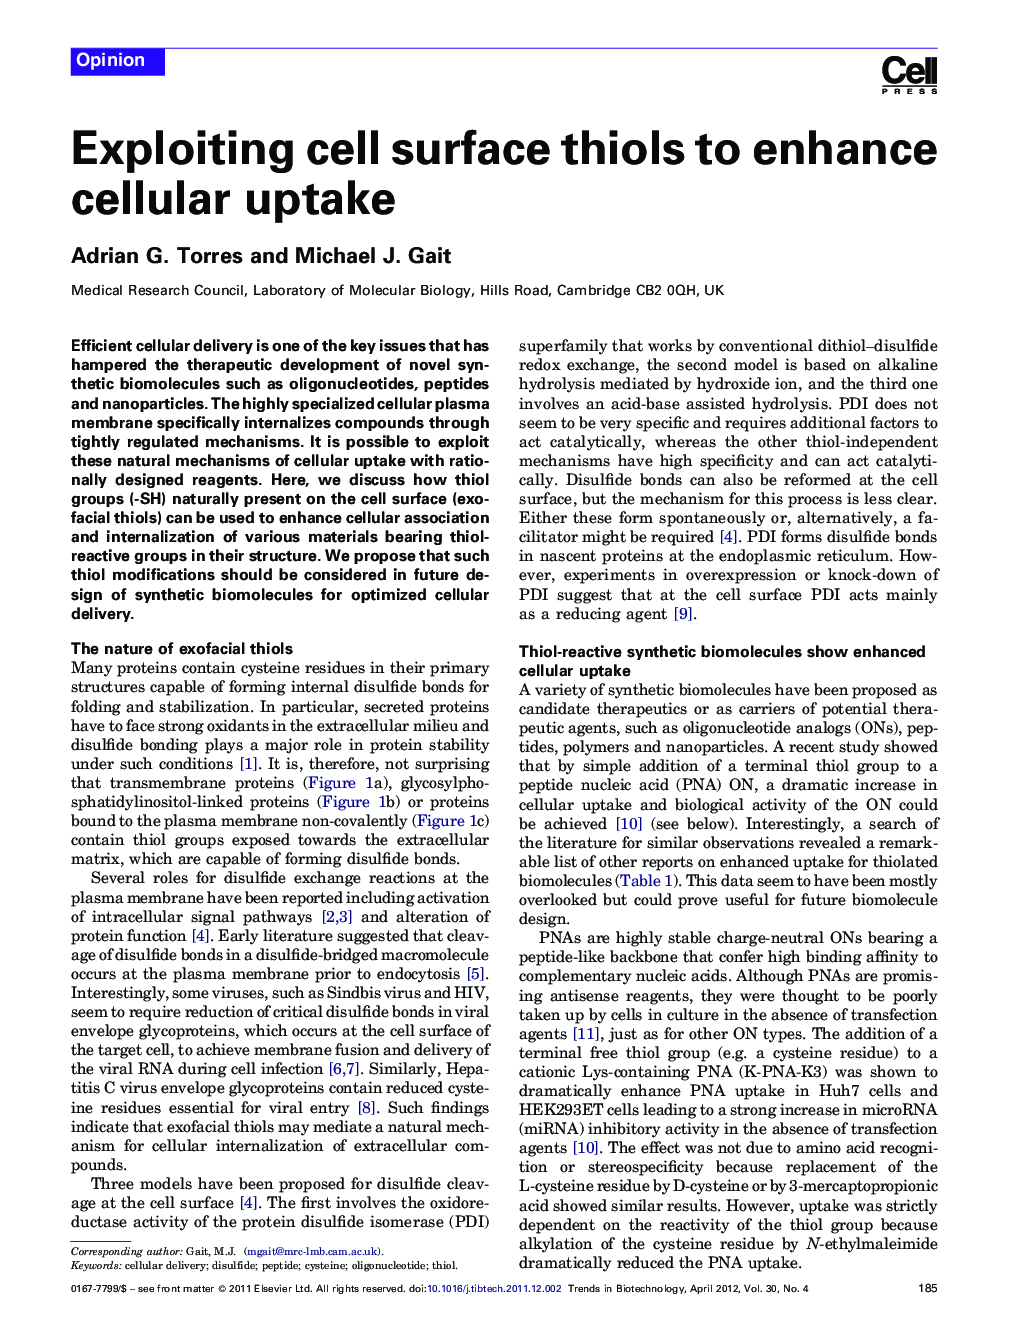 Exploiting cell surface thiols to enhance cellular uptake